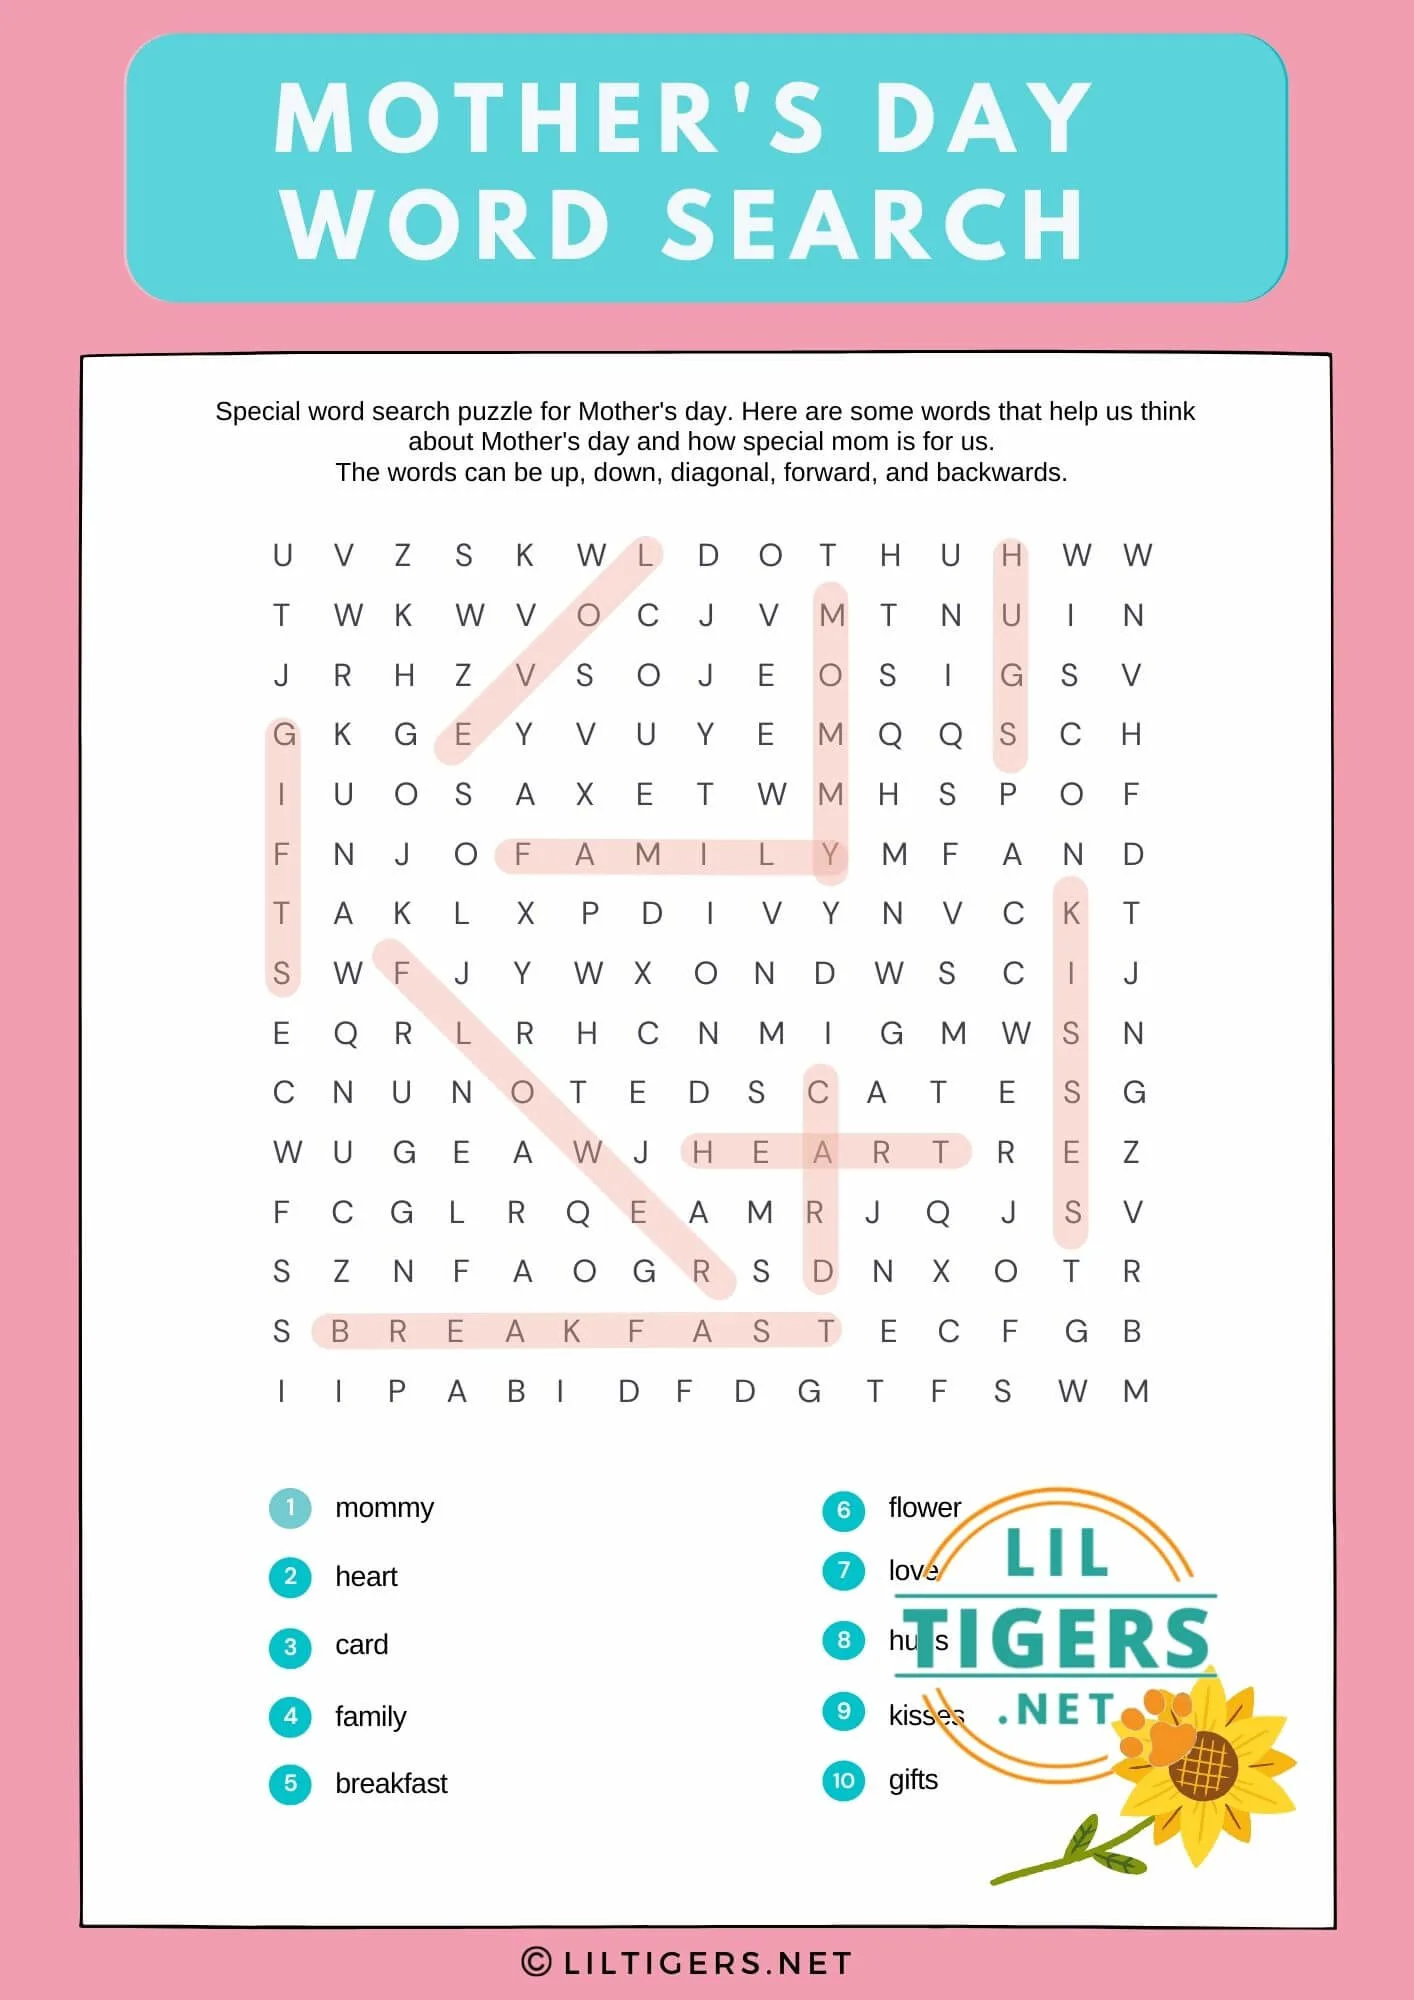 Mother's day word search puzzle